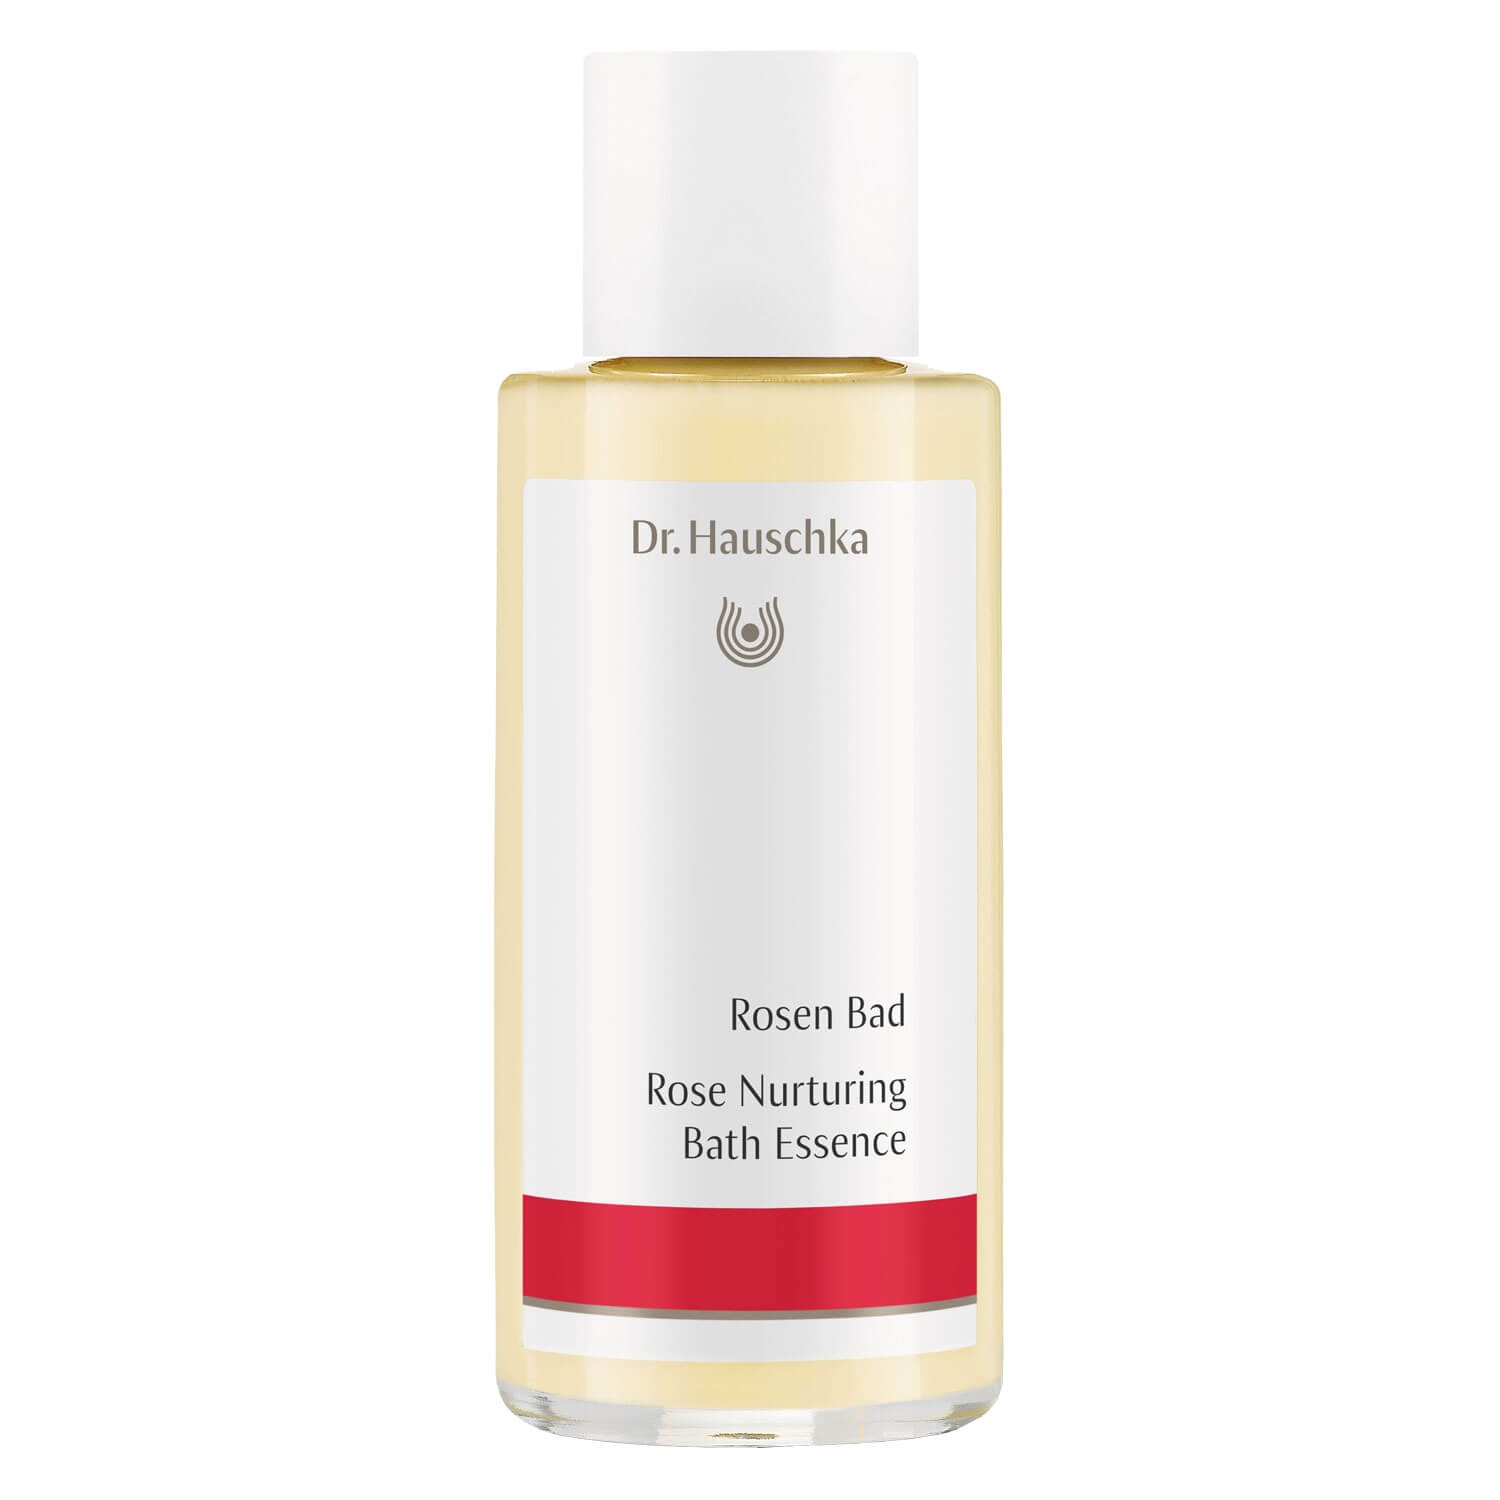 Product image from Dr. Hauschka - Rosen Bad